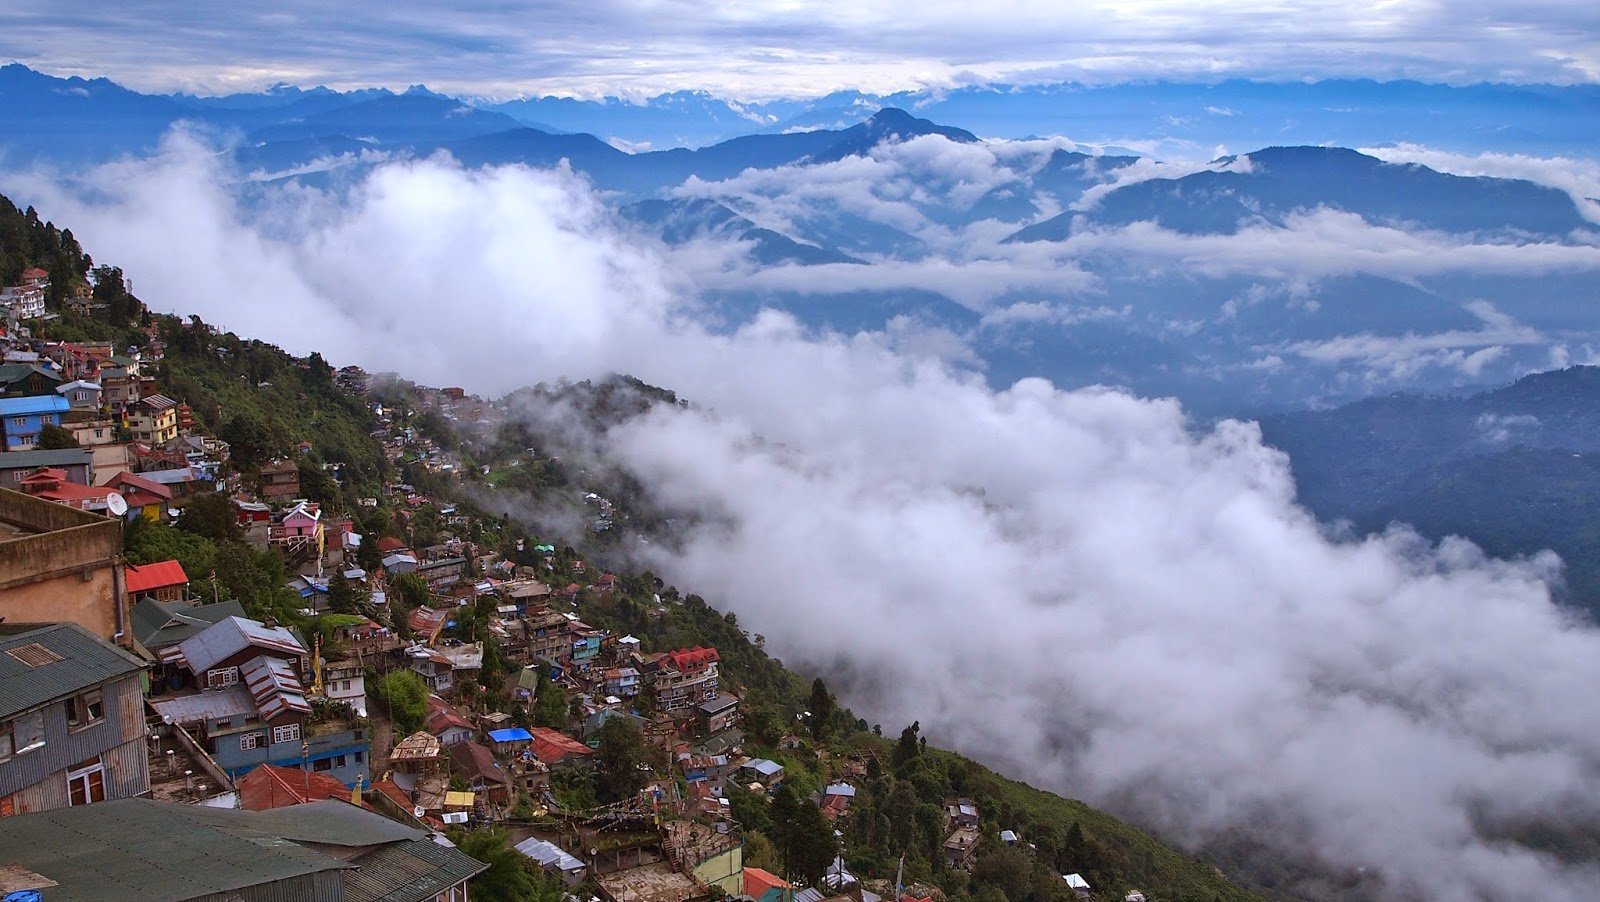 Plan Your Summer Breaks At These Hill Stations Not More Than 12 Hours From Delhi